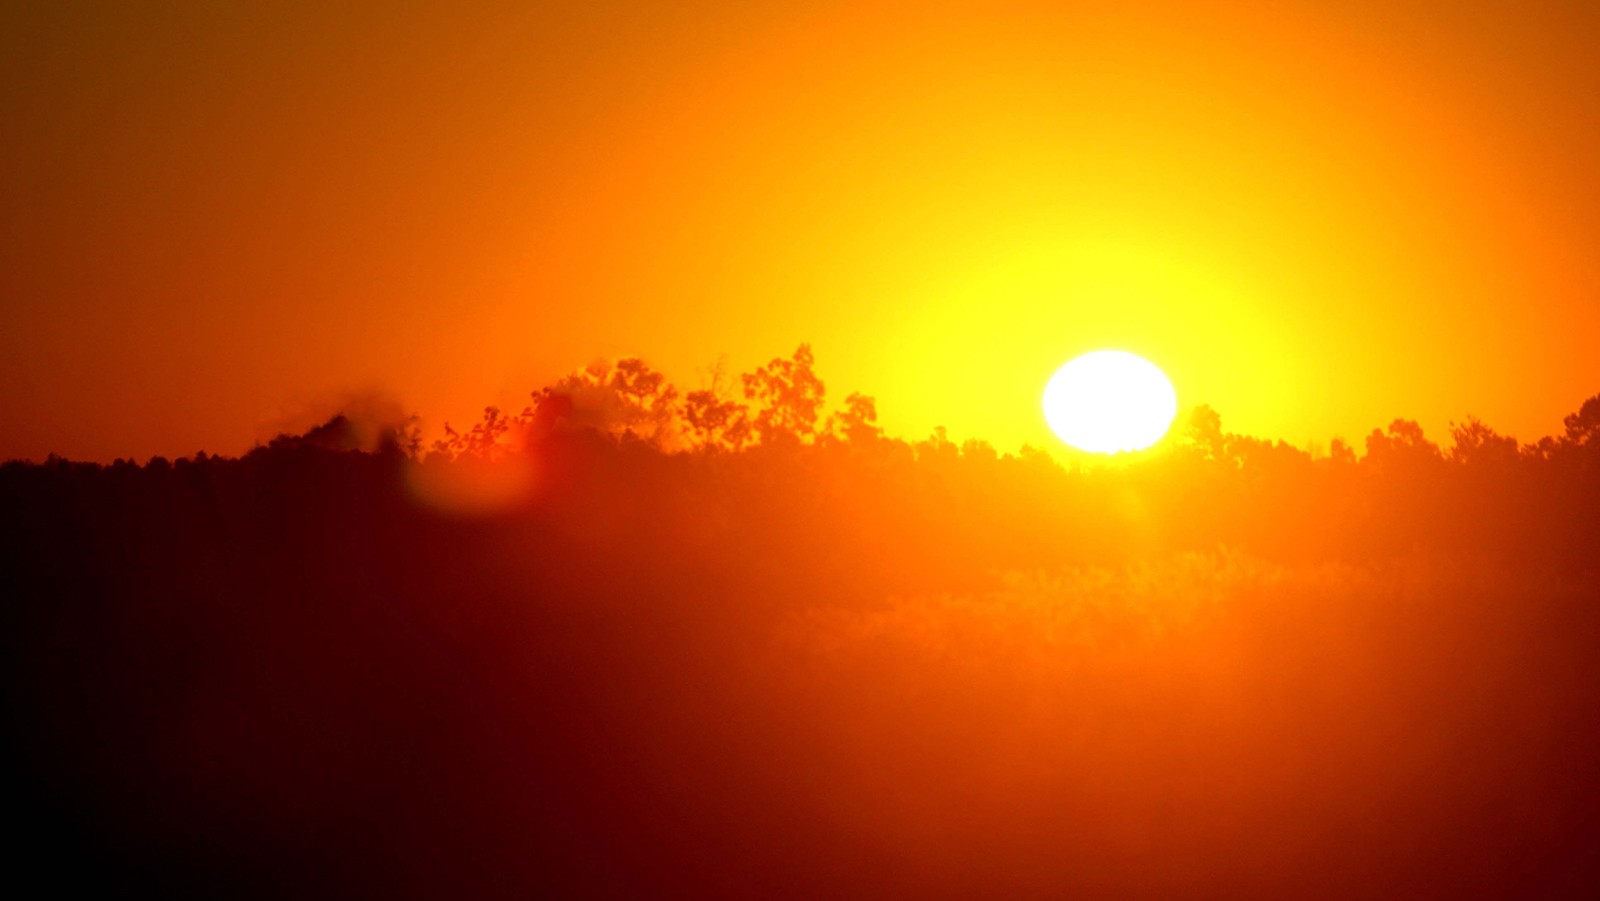 A bright yellow sun sits above trees in a orange sky.